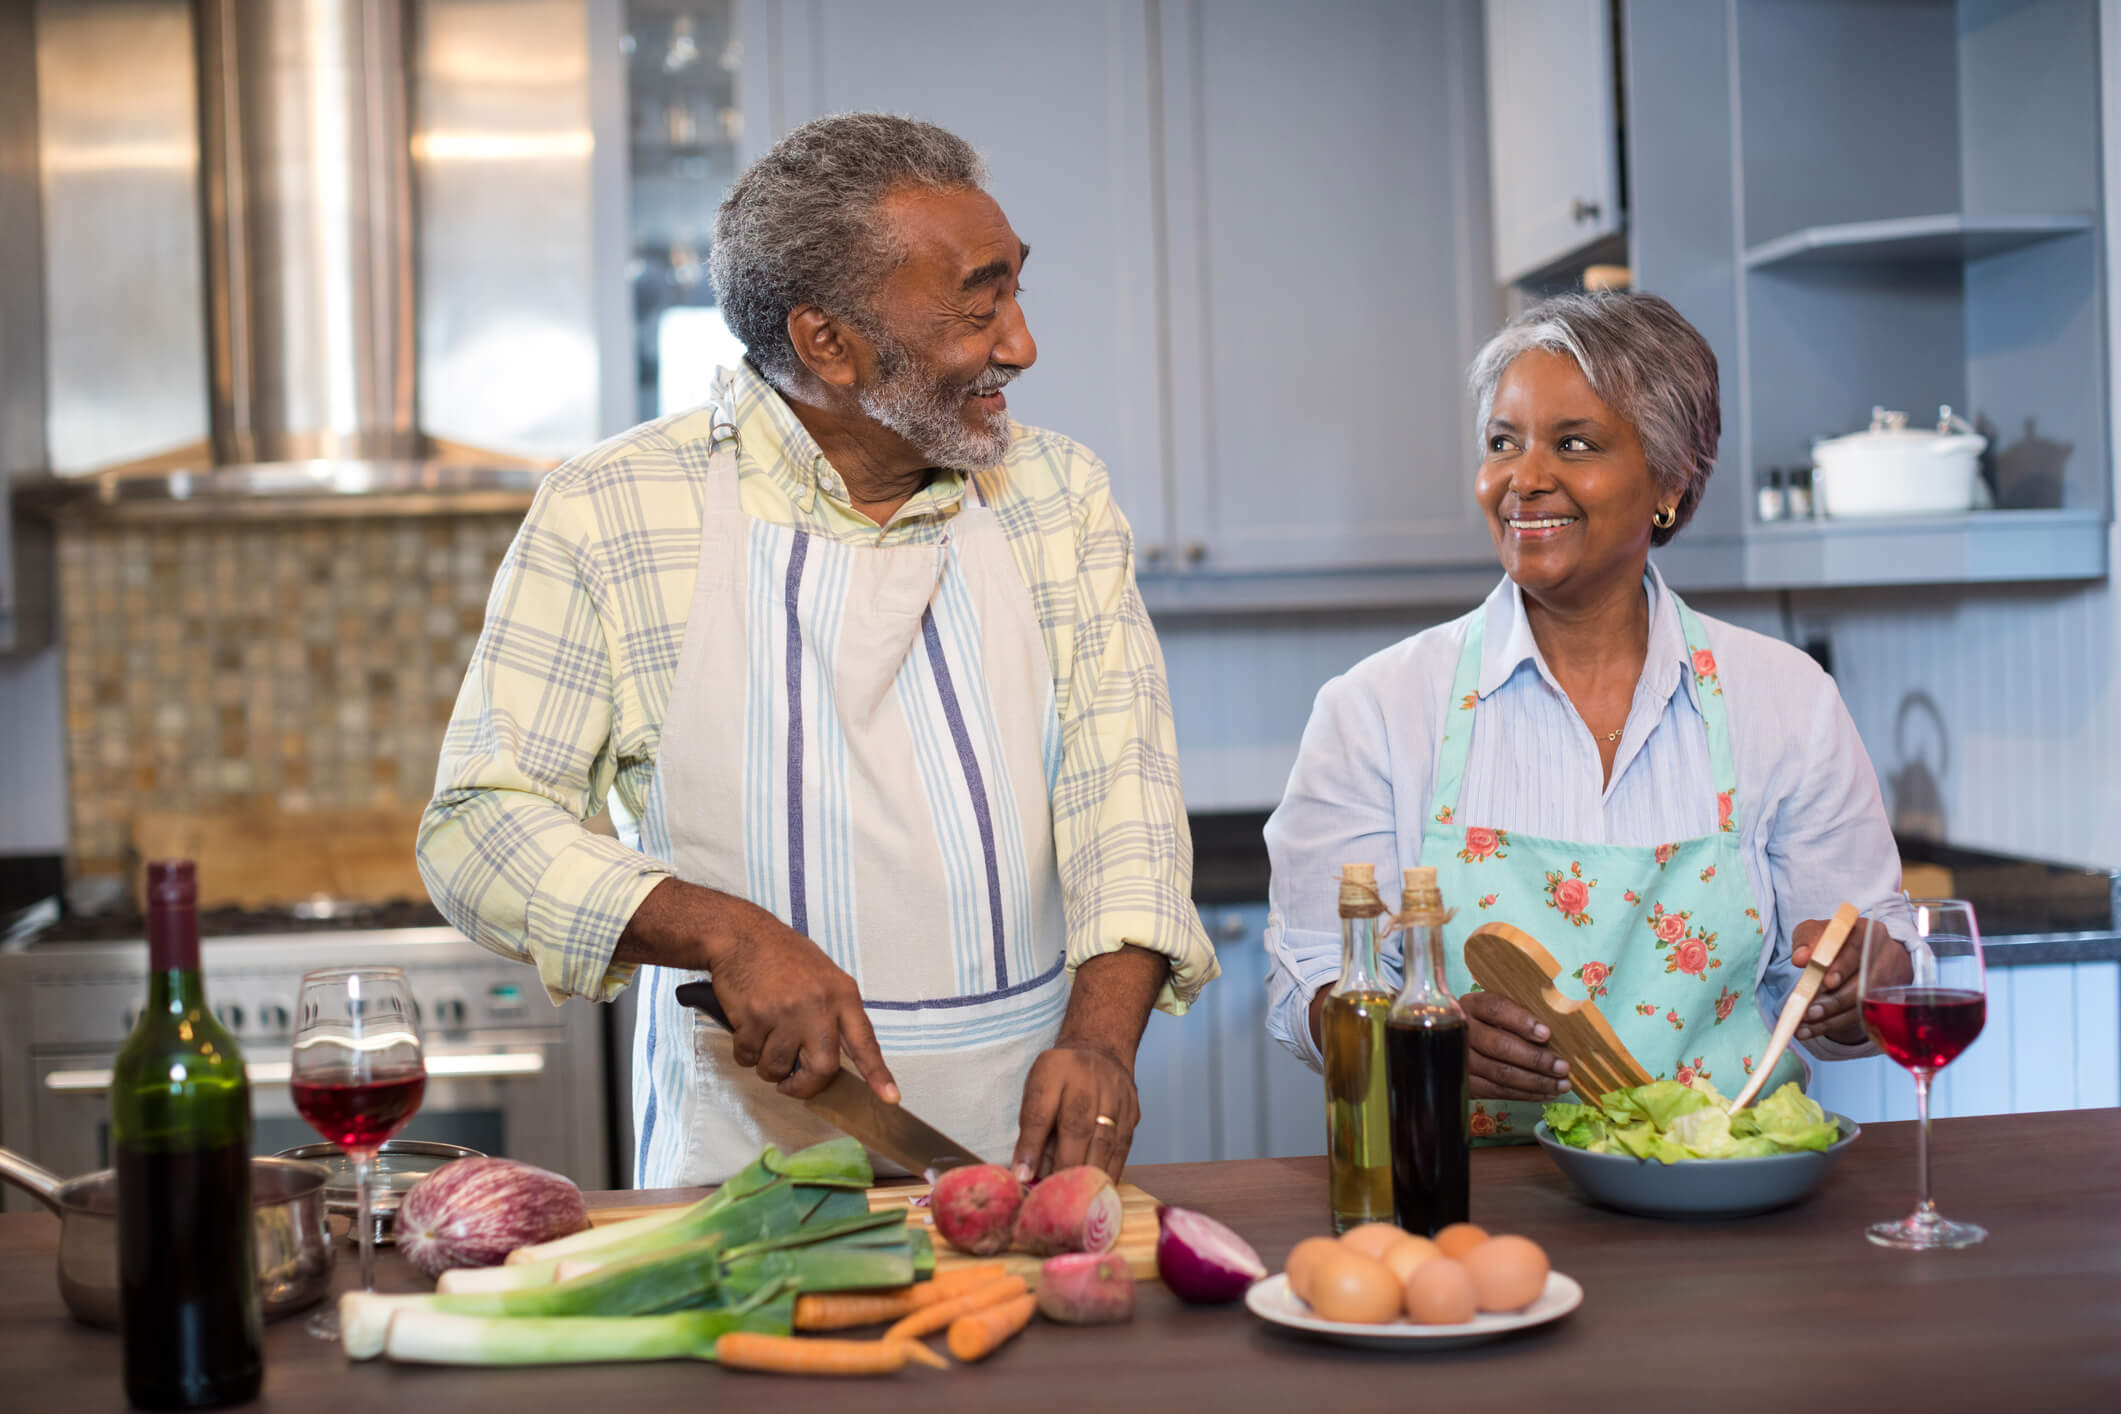 Image of previous post - 5 Diet and Nutrition Tips for Seniors